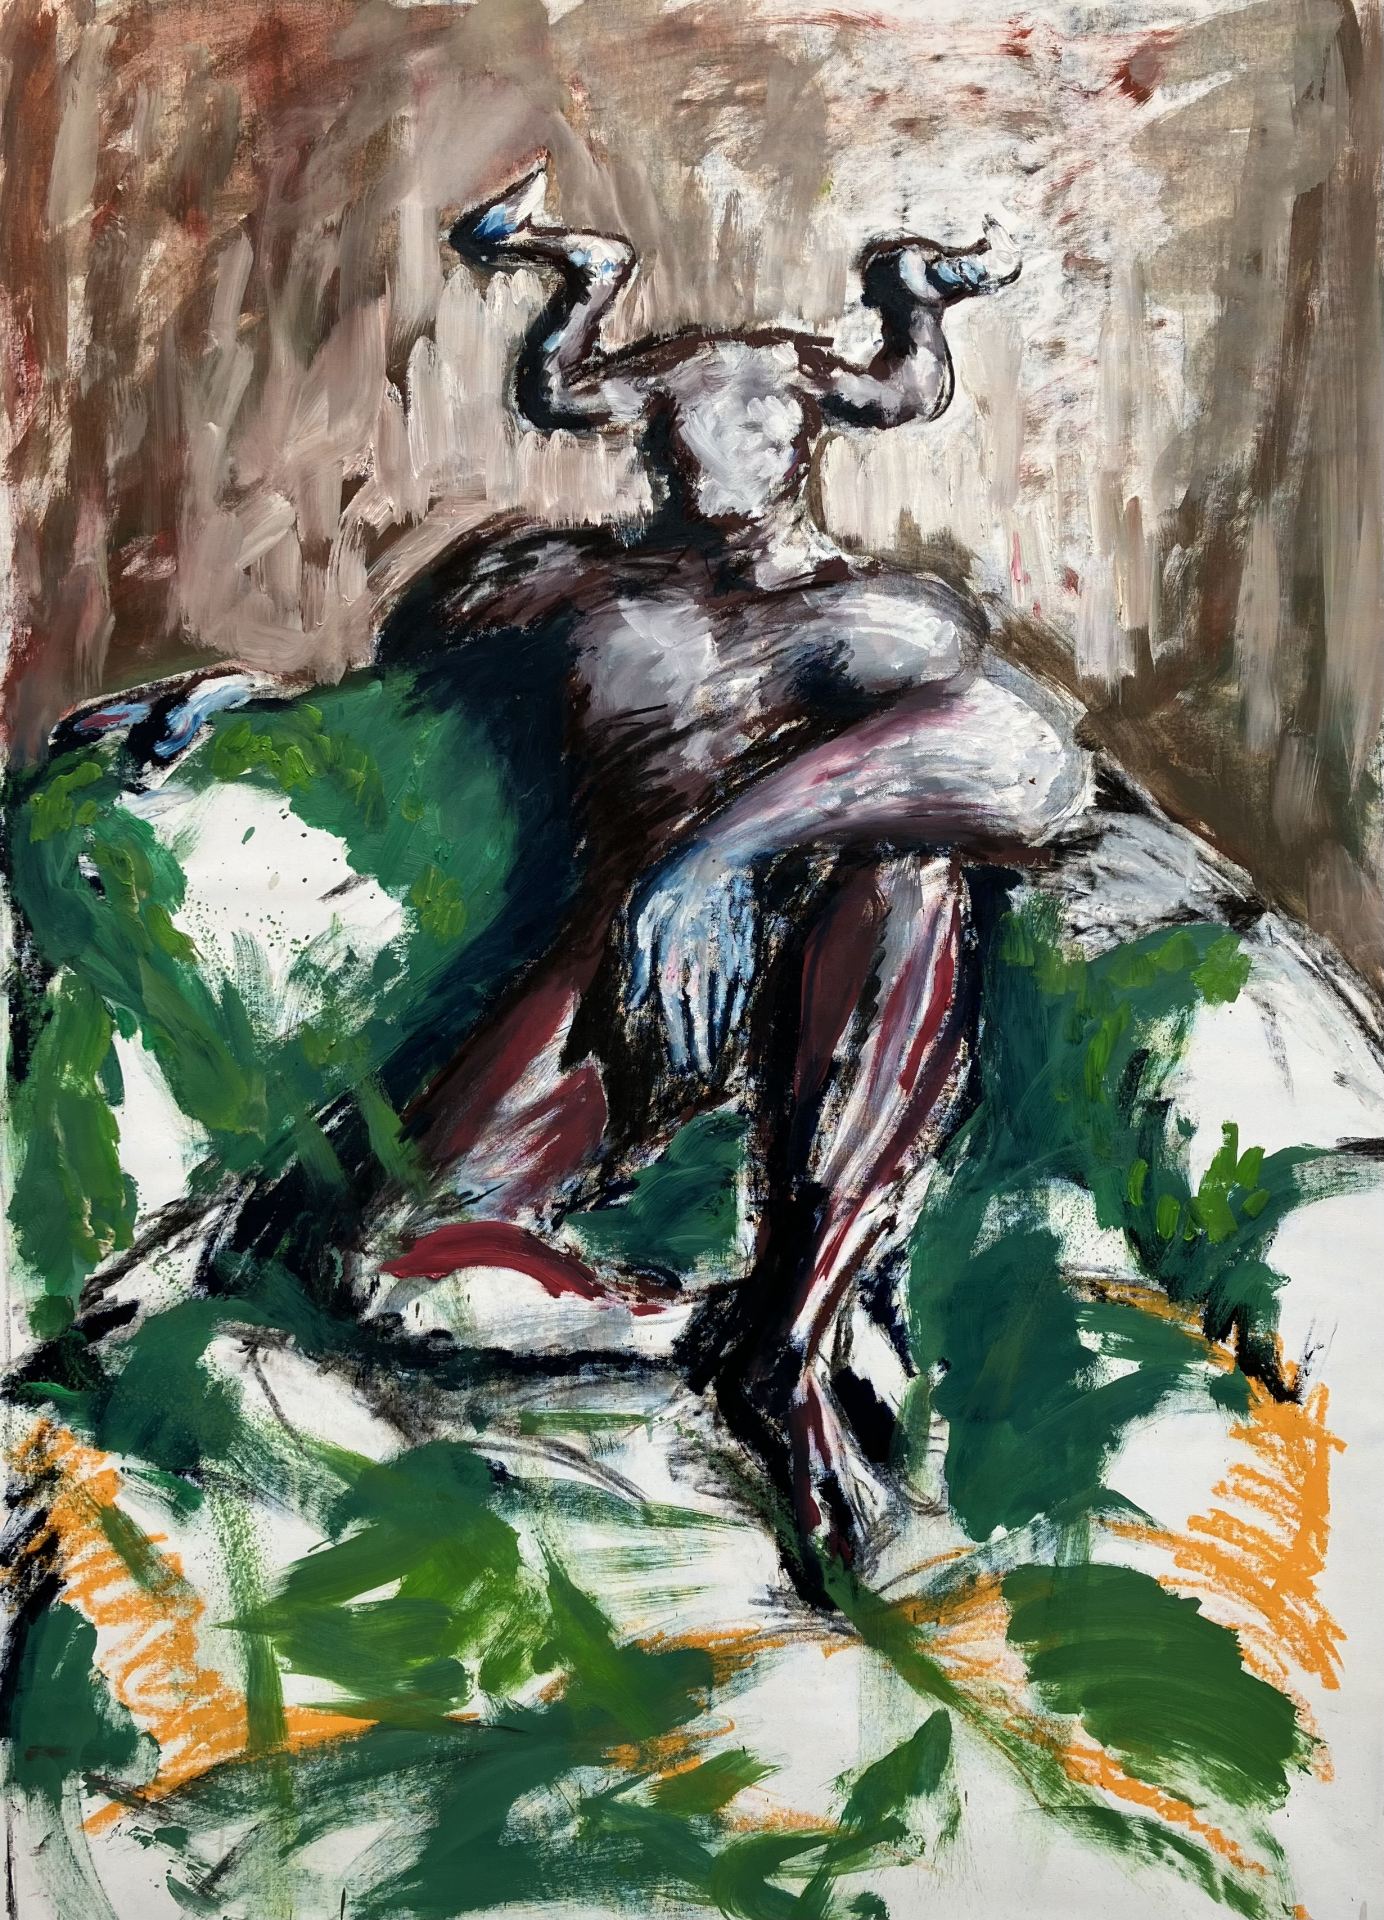 An oil painting of a horned figure sitting on a green object against a brown background.